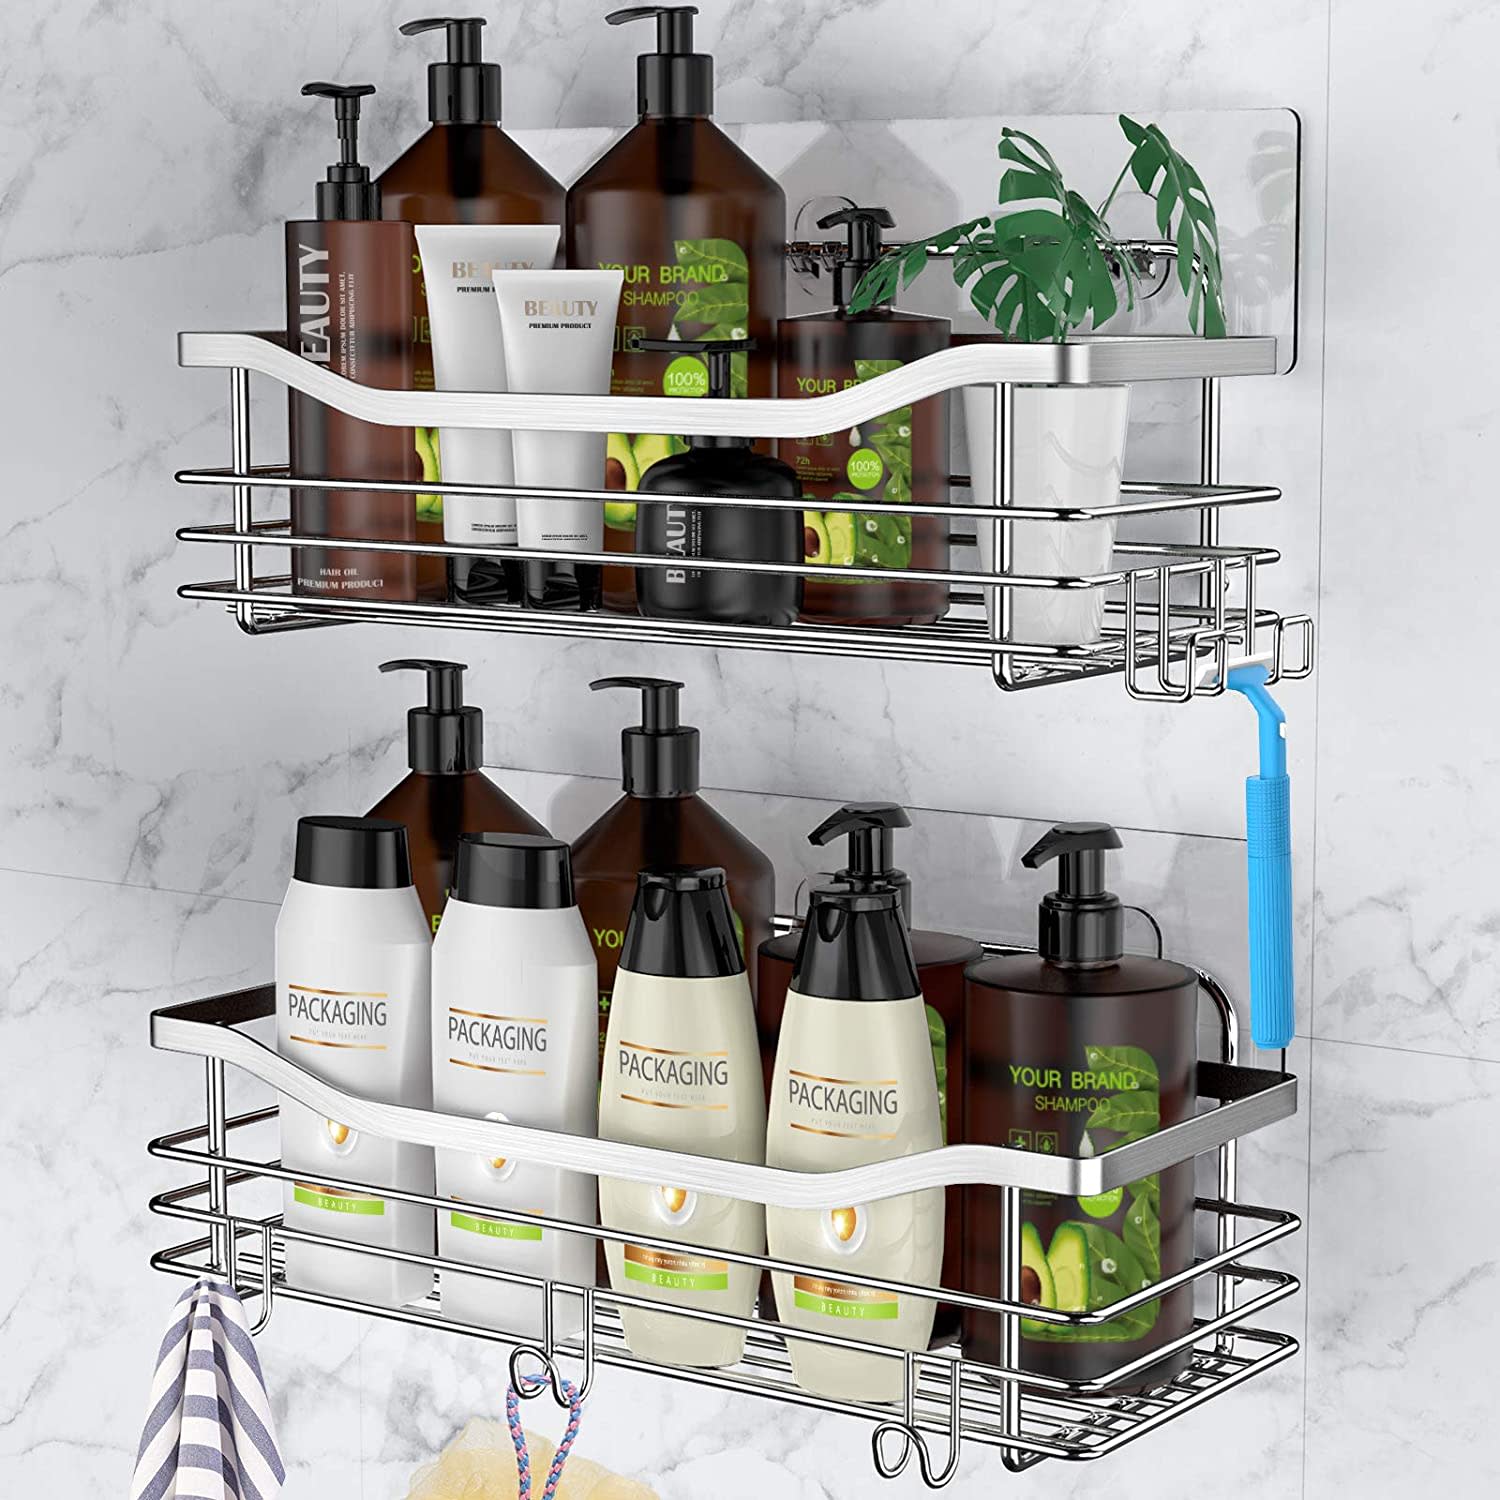 Watch how easy it is to install the Kincmax Shower Caddy! A great way